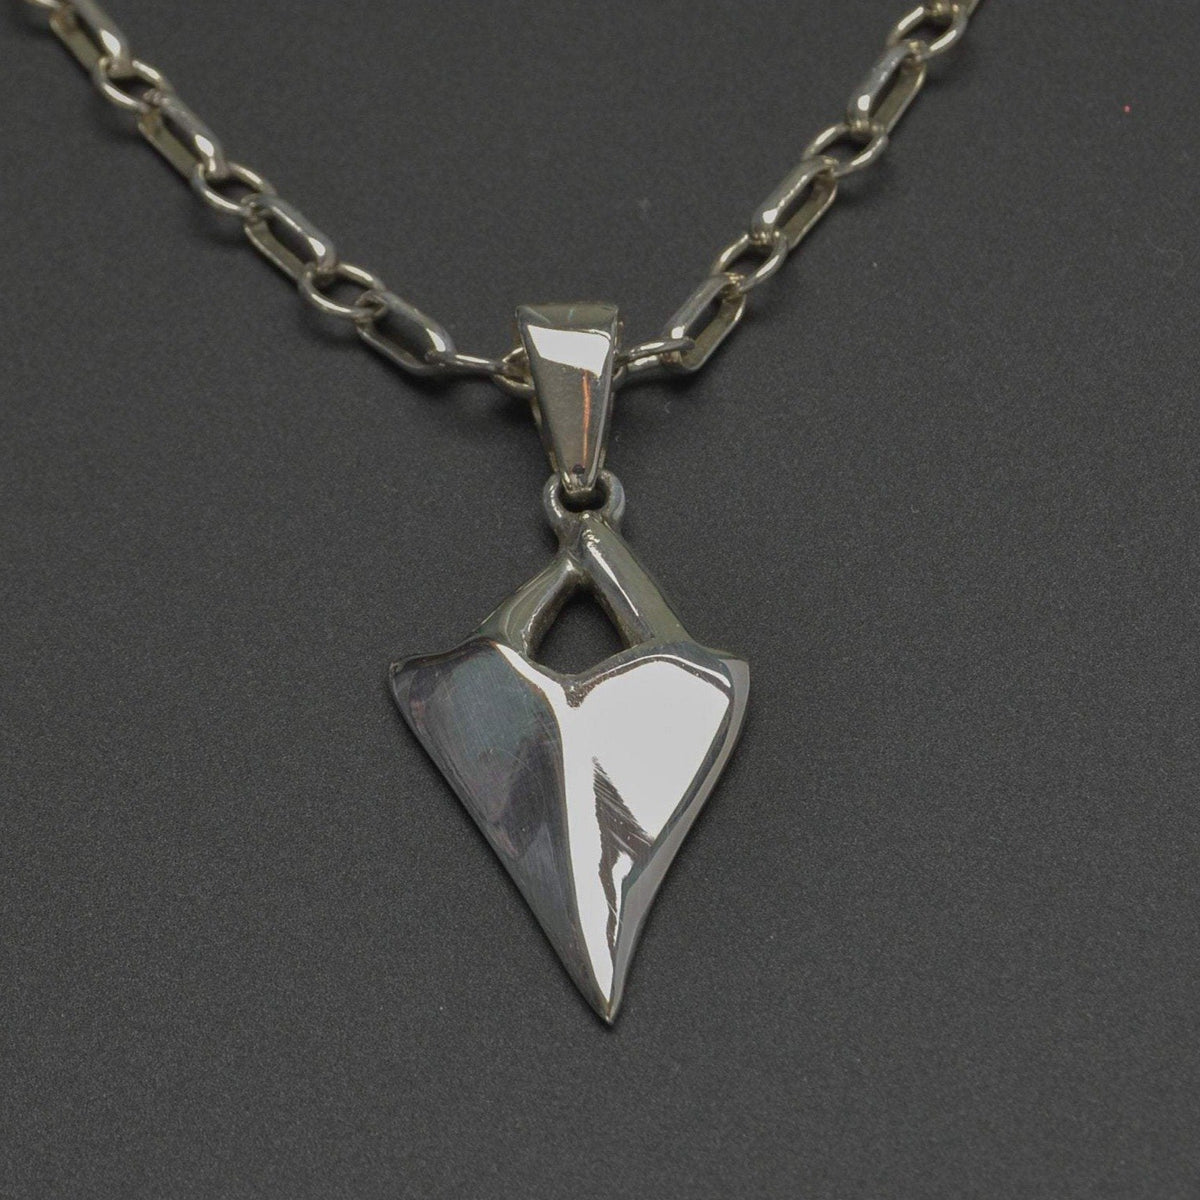 Highly polished silver shark tooth pendant